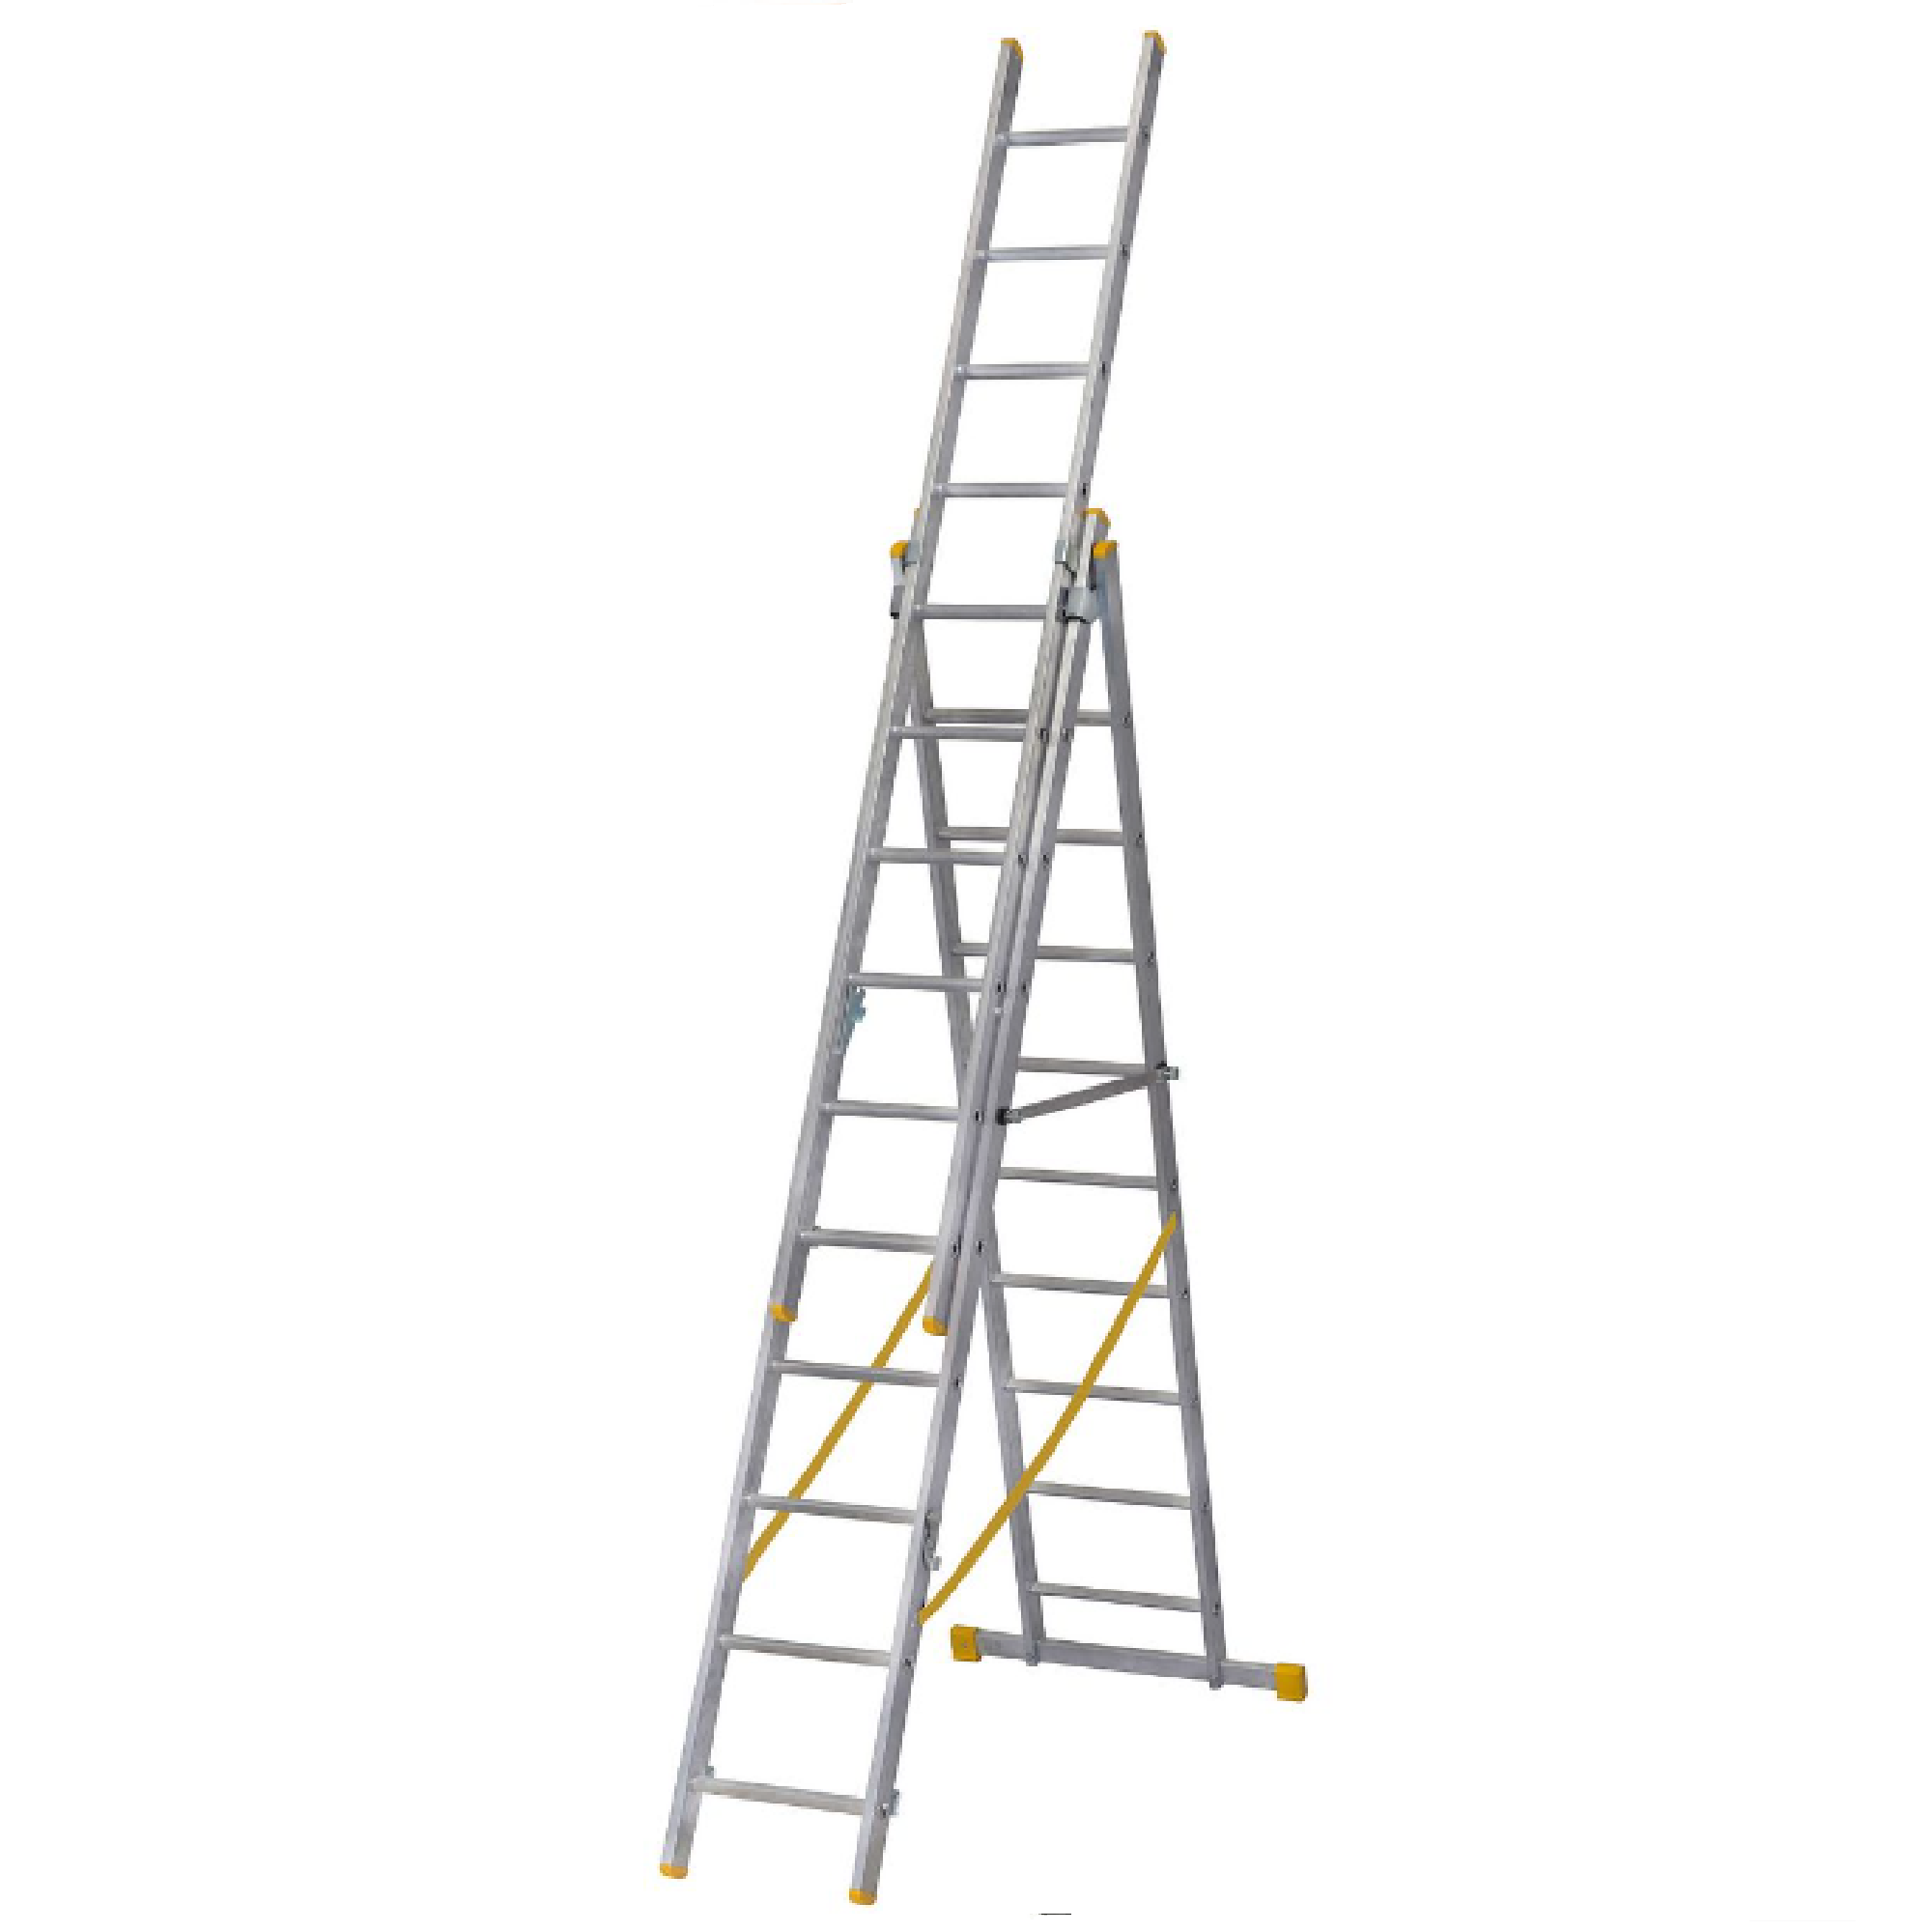 YOUNGMAN Combi Ladder 100, 4-IN-1 Combination Ladder 2.96M (3M)